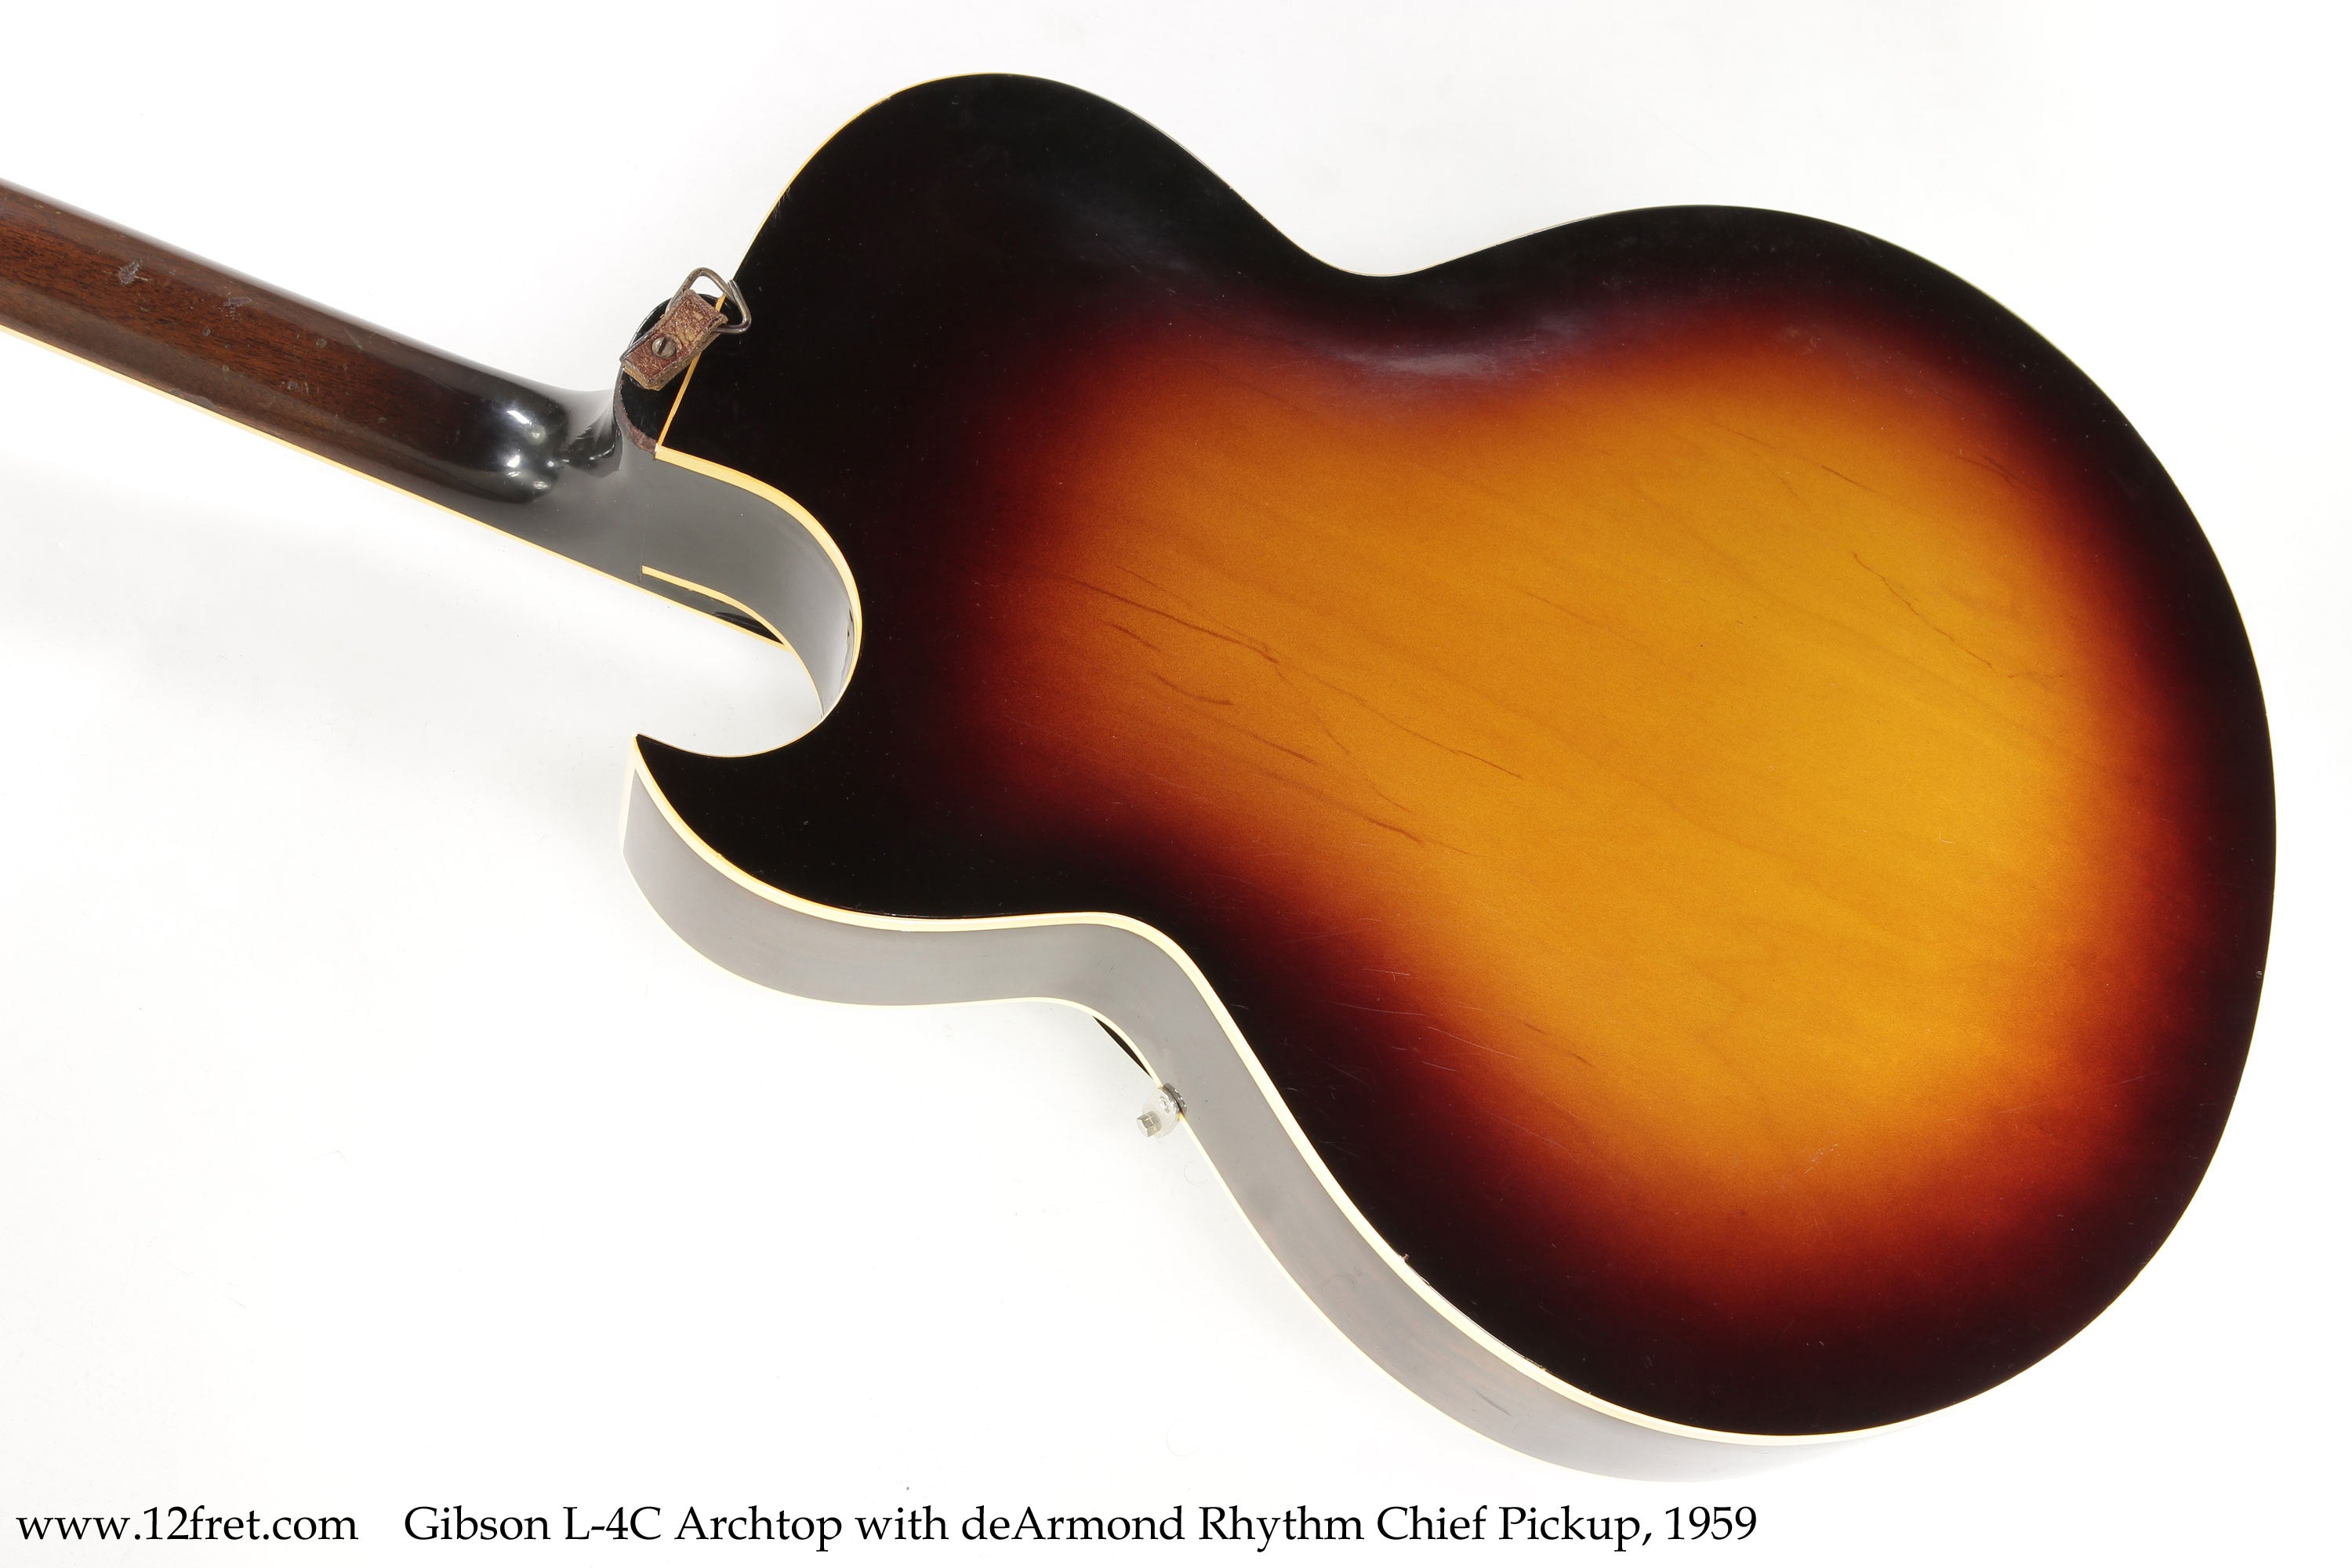 Gibson L-4C Archtop with DeArmond Rhythm Chief Pickup, 1959 - The Twelfth Fret